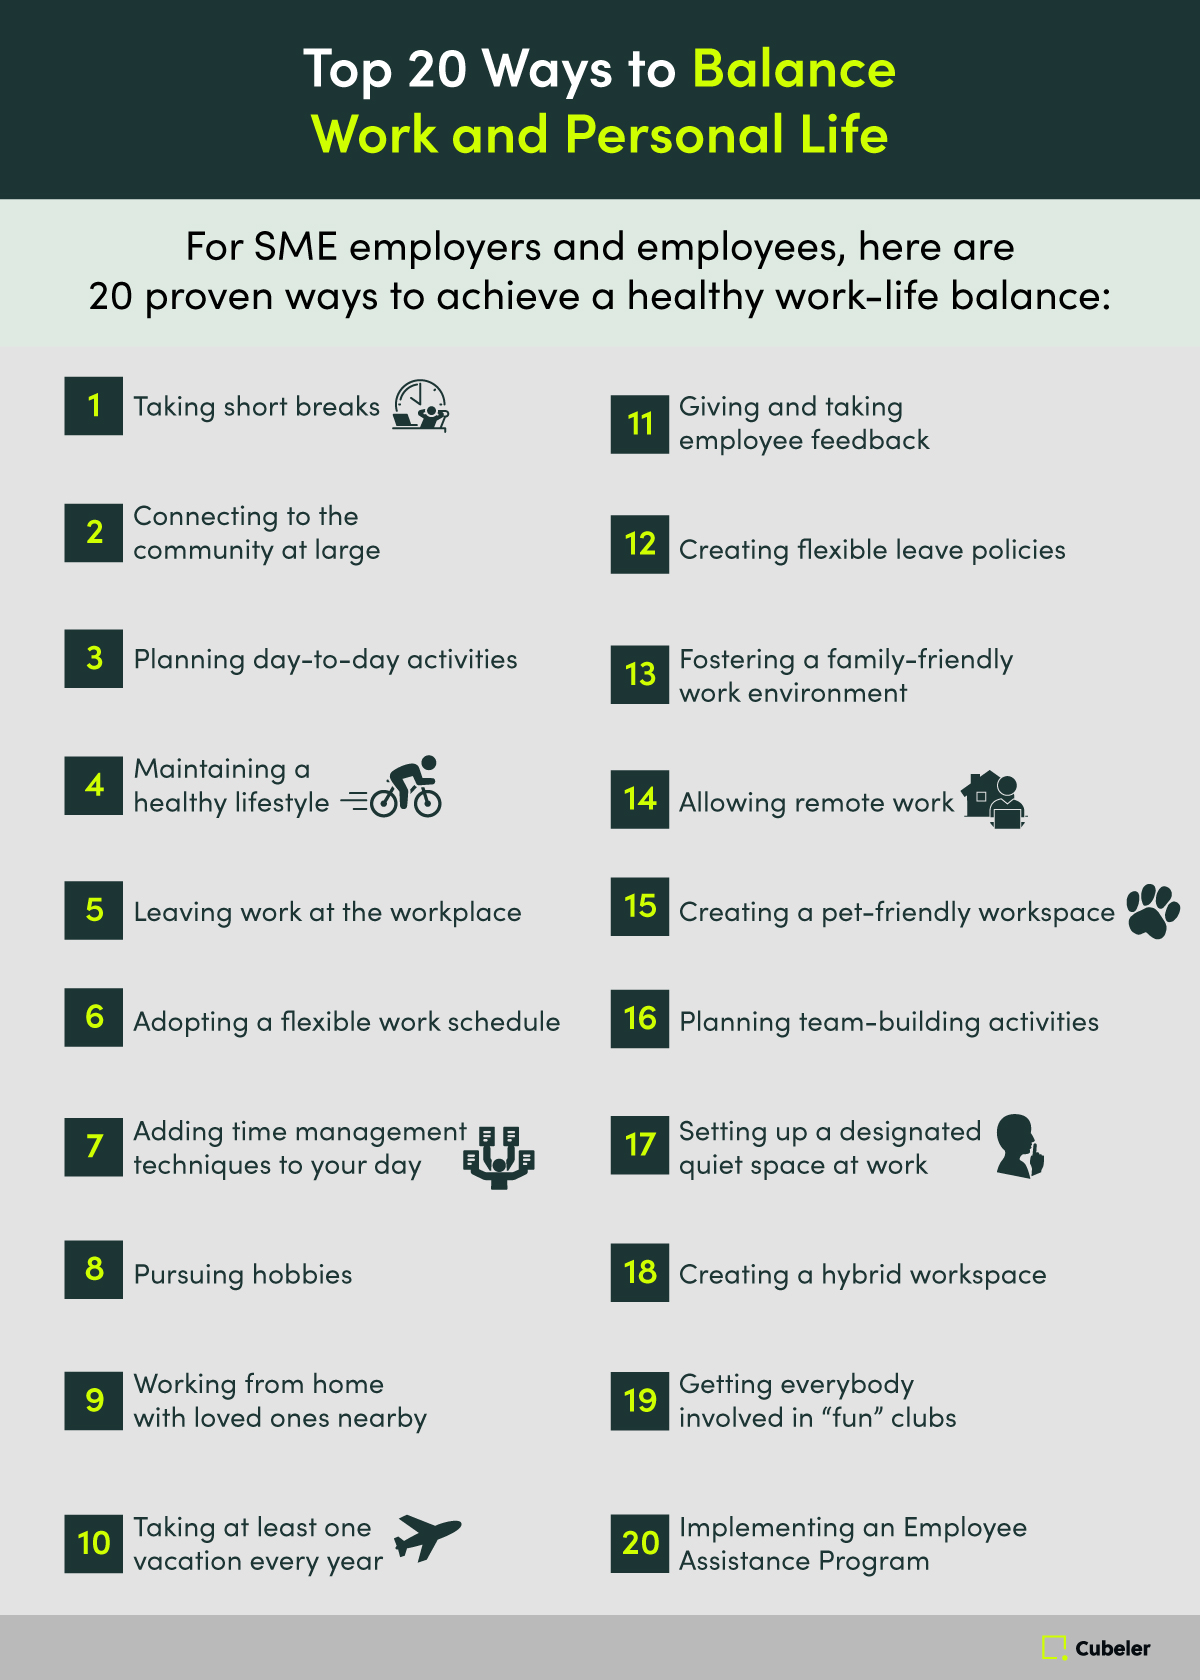 op 20 ways to balance work and personal life